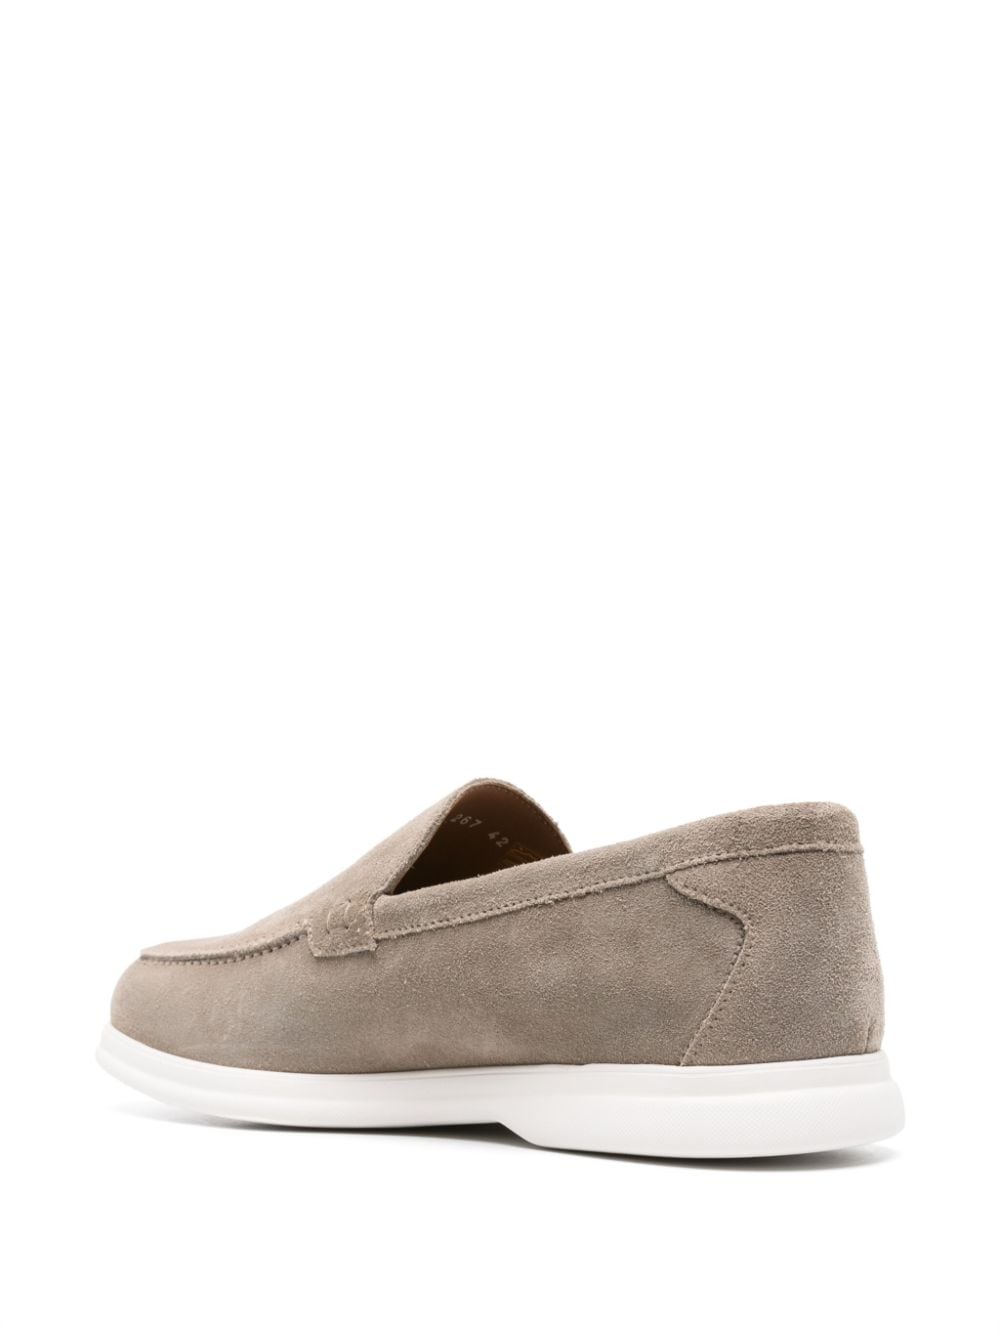 Dove gray suede moccasin